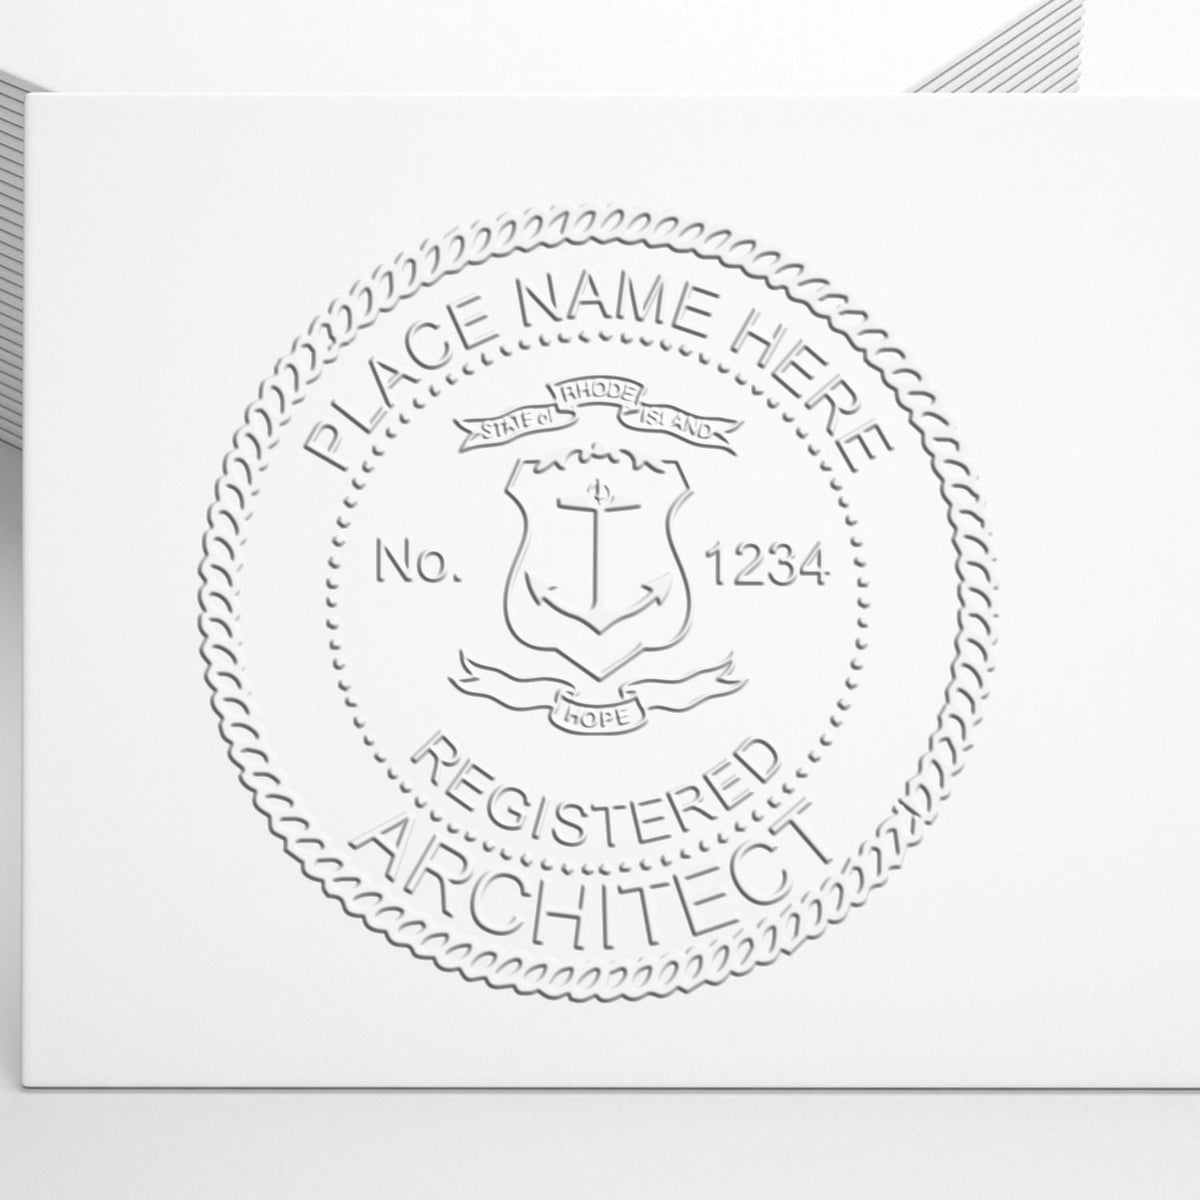 The Gift Rhode Island Architect Seal stamp impression comes to life with a crisp, detailed image stamped on paper - showcasing true professional quality.